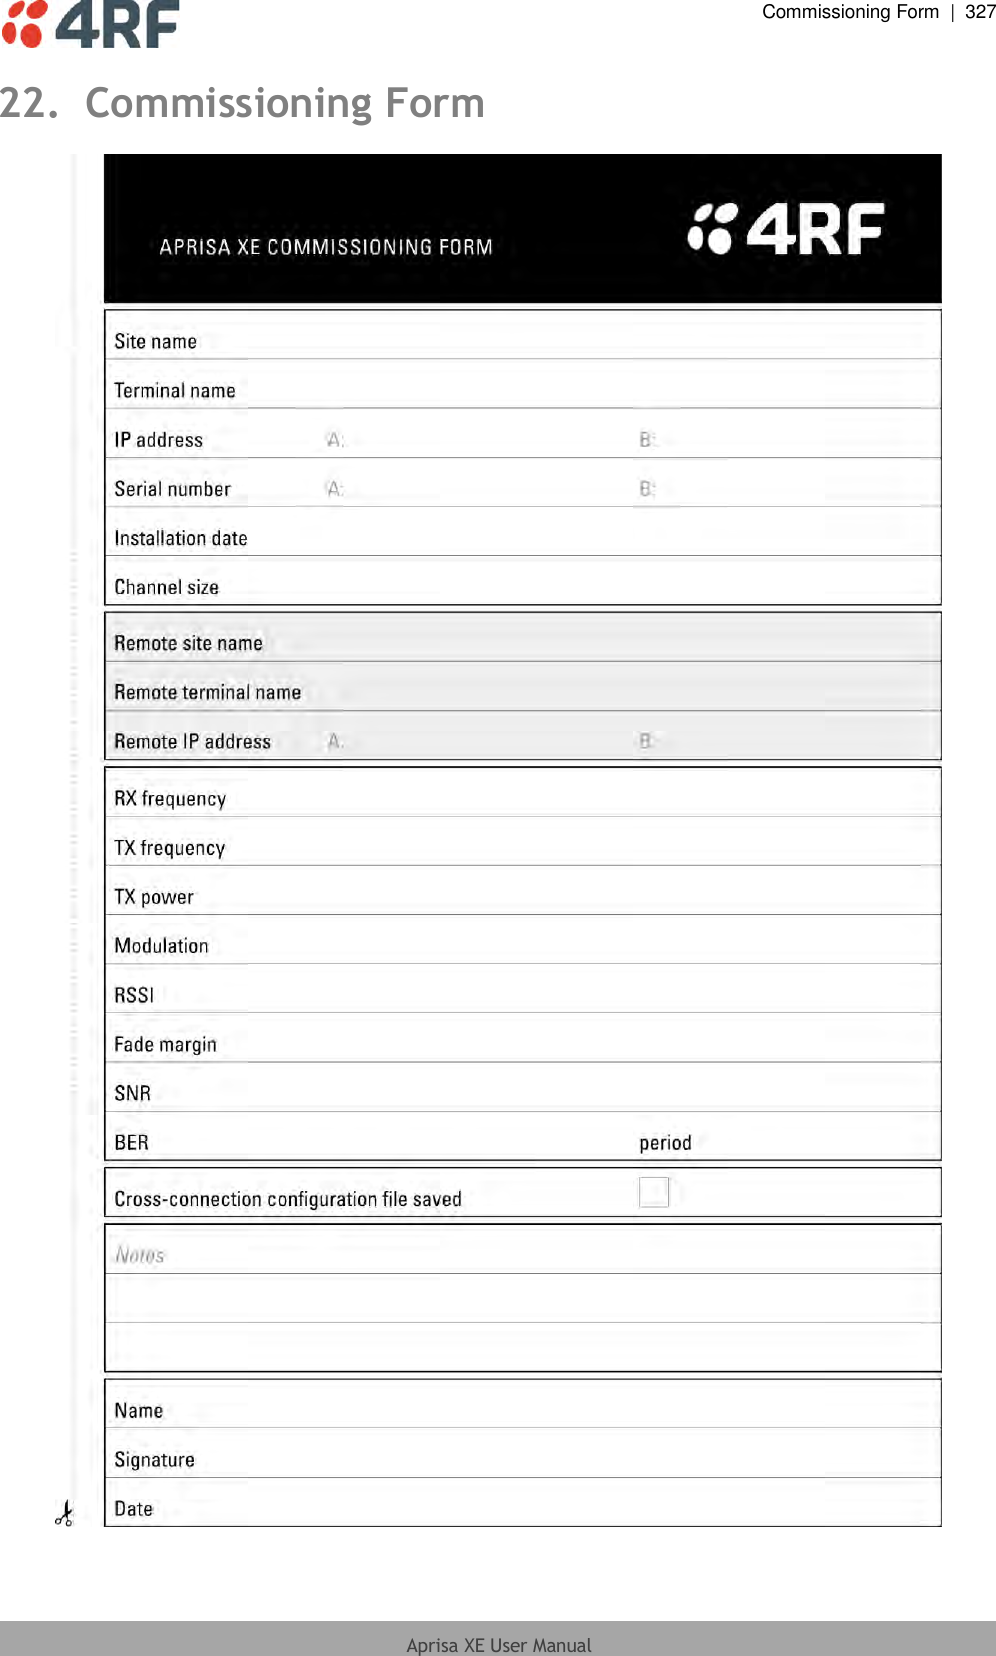  Commissioning Form  |  327  Aprisa XE User Manual  22. Commissioning Form  